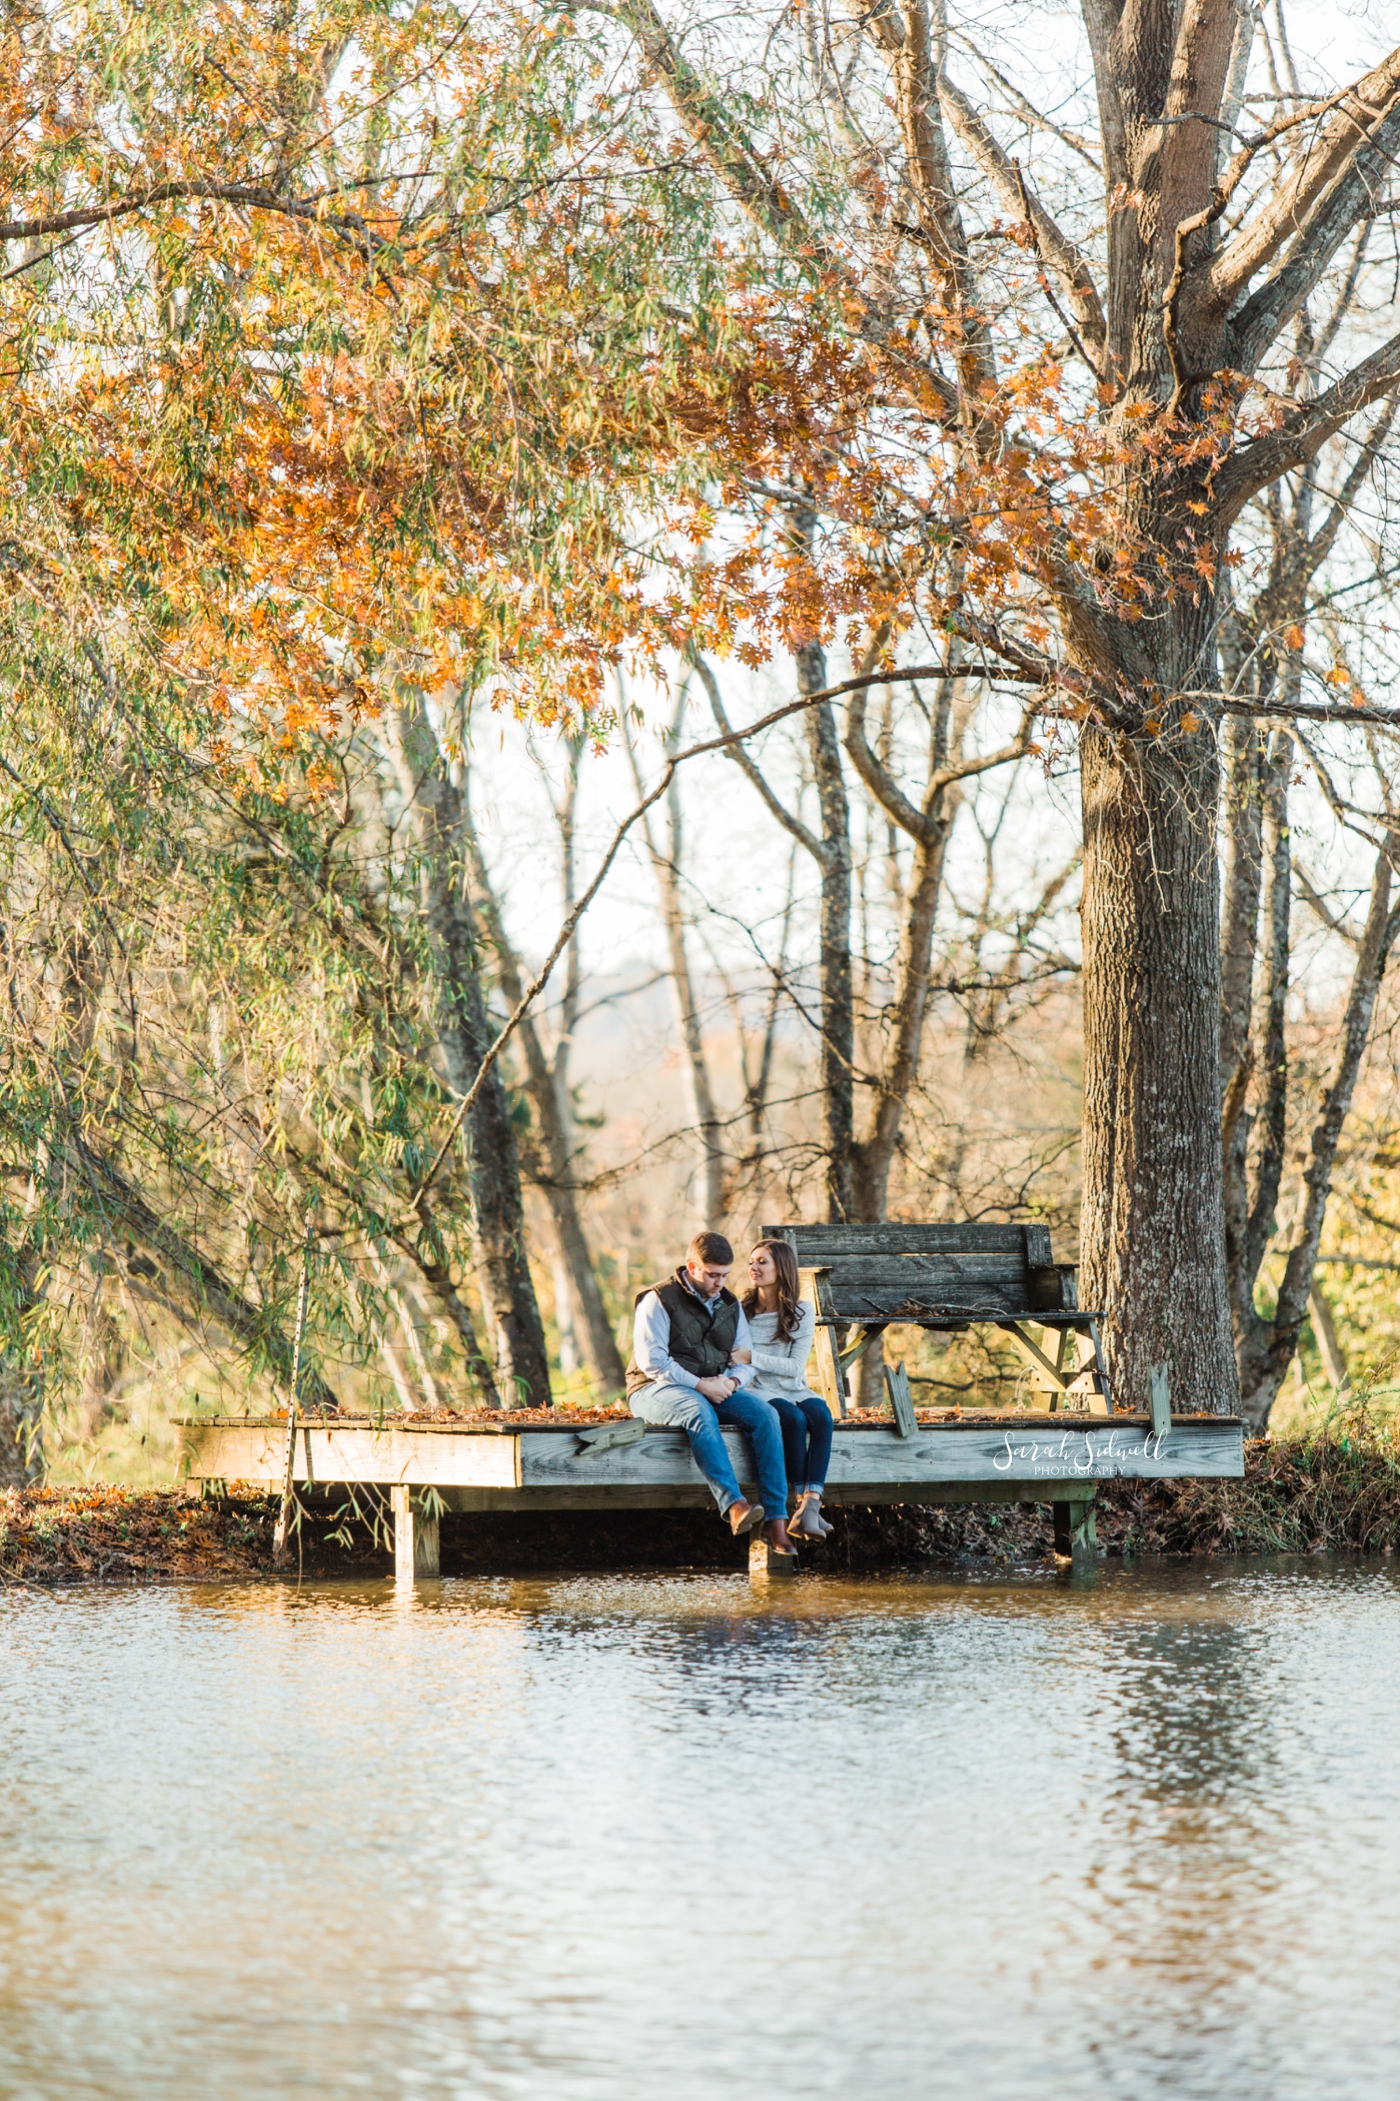 An engaged couple sit on a dock near a lake | Engagement Photography Nashville